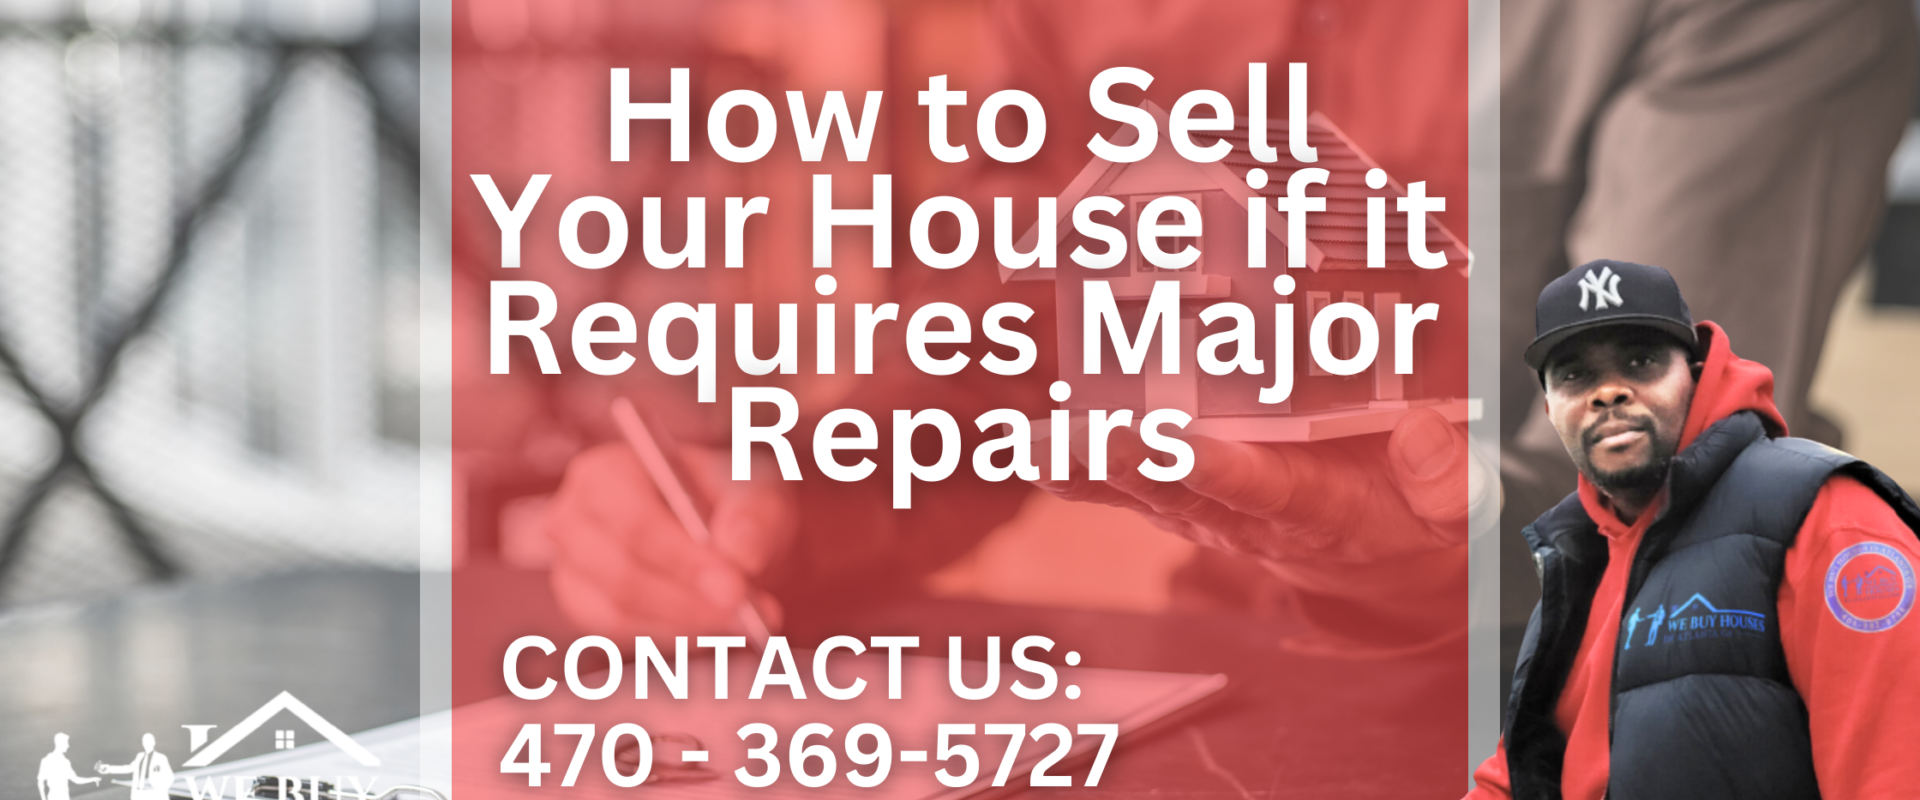 How to Sell Your House if it Requires Major Repairs